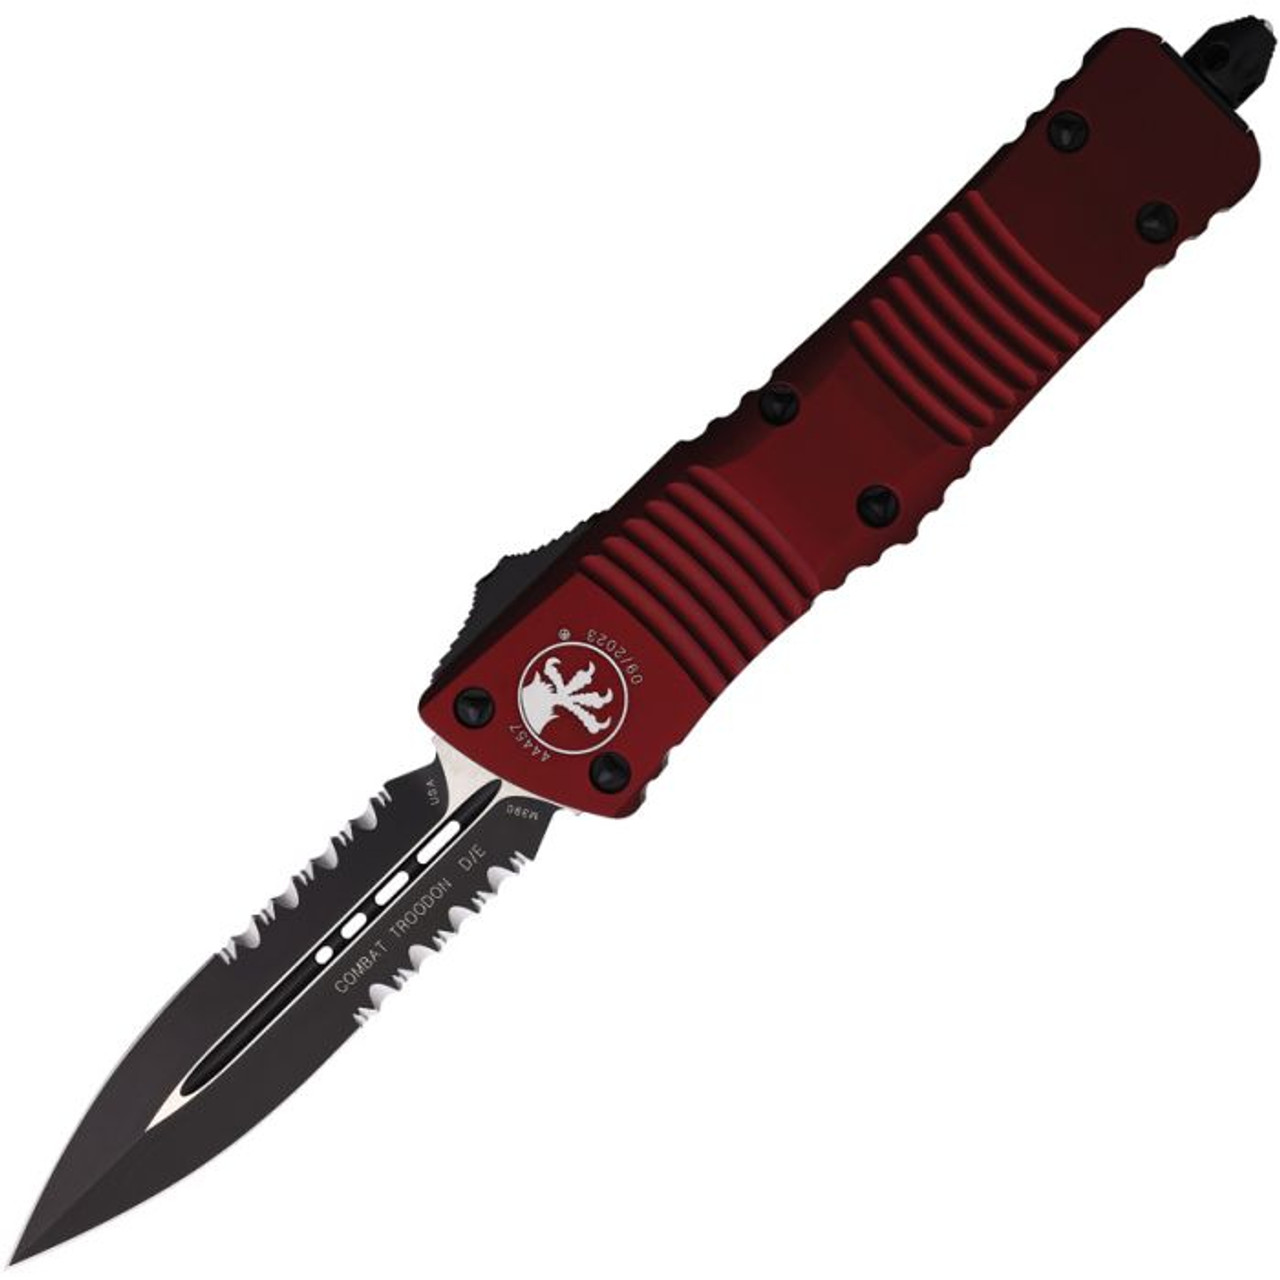 Microtech Combat Troodon D/E OTF (MCT1422MR) 3.88" Bohler M390 Two-Tone Black Cerakote and Satin Finished Partially Serrated Dagger Double Edged Blade, Red Anodized Aluminum Handle